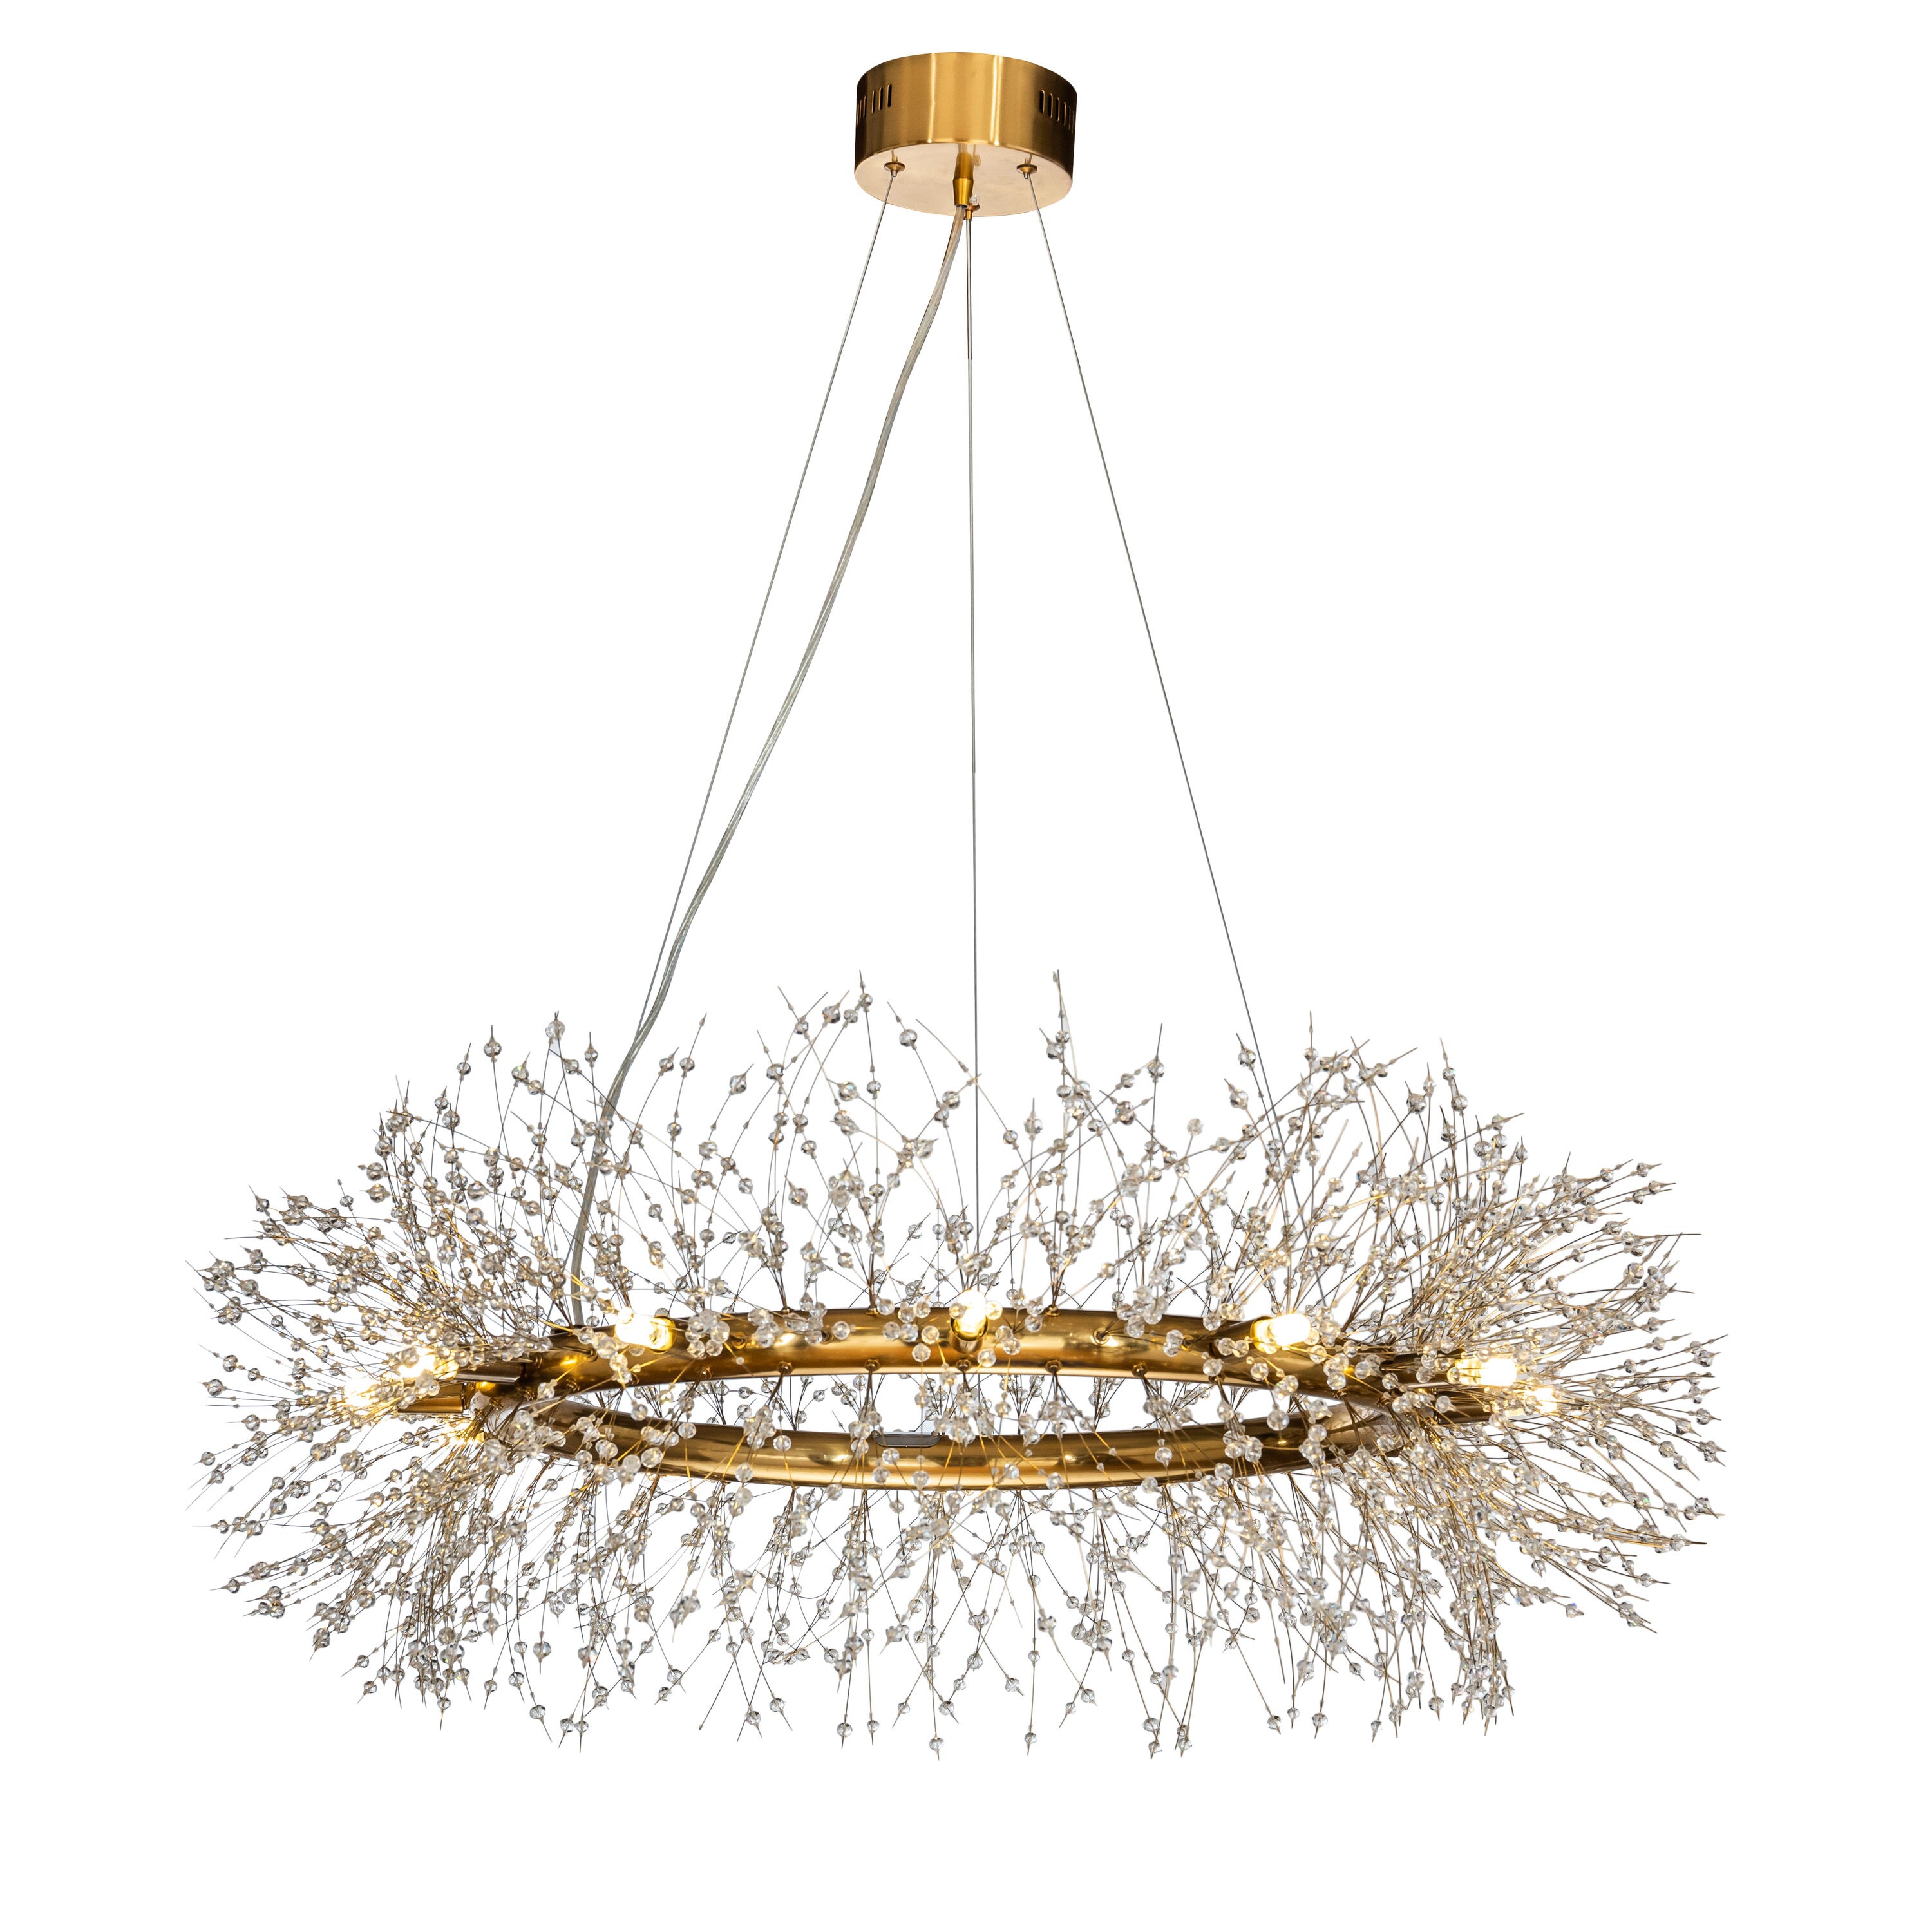 AloaDecor Lighting 12-Light Antique Bronze Modern/Contemporary Dry Rated Chandelier the Chandeliers department at